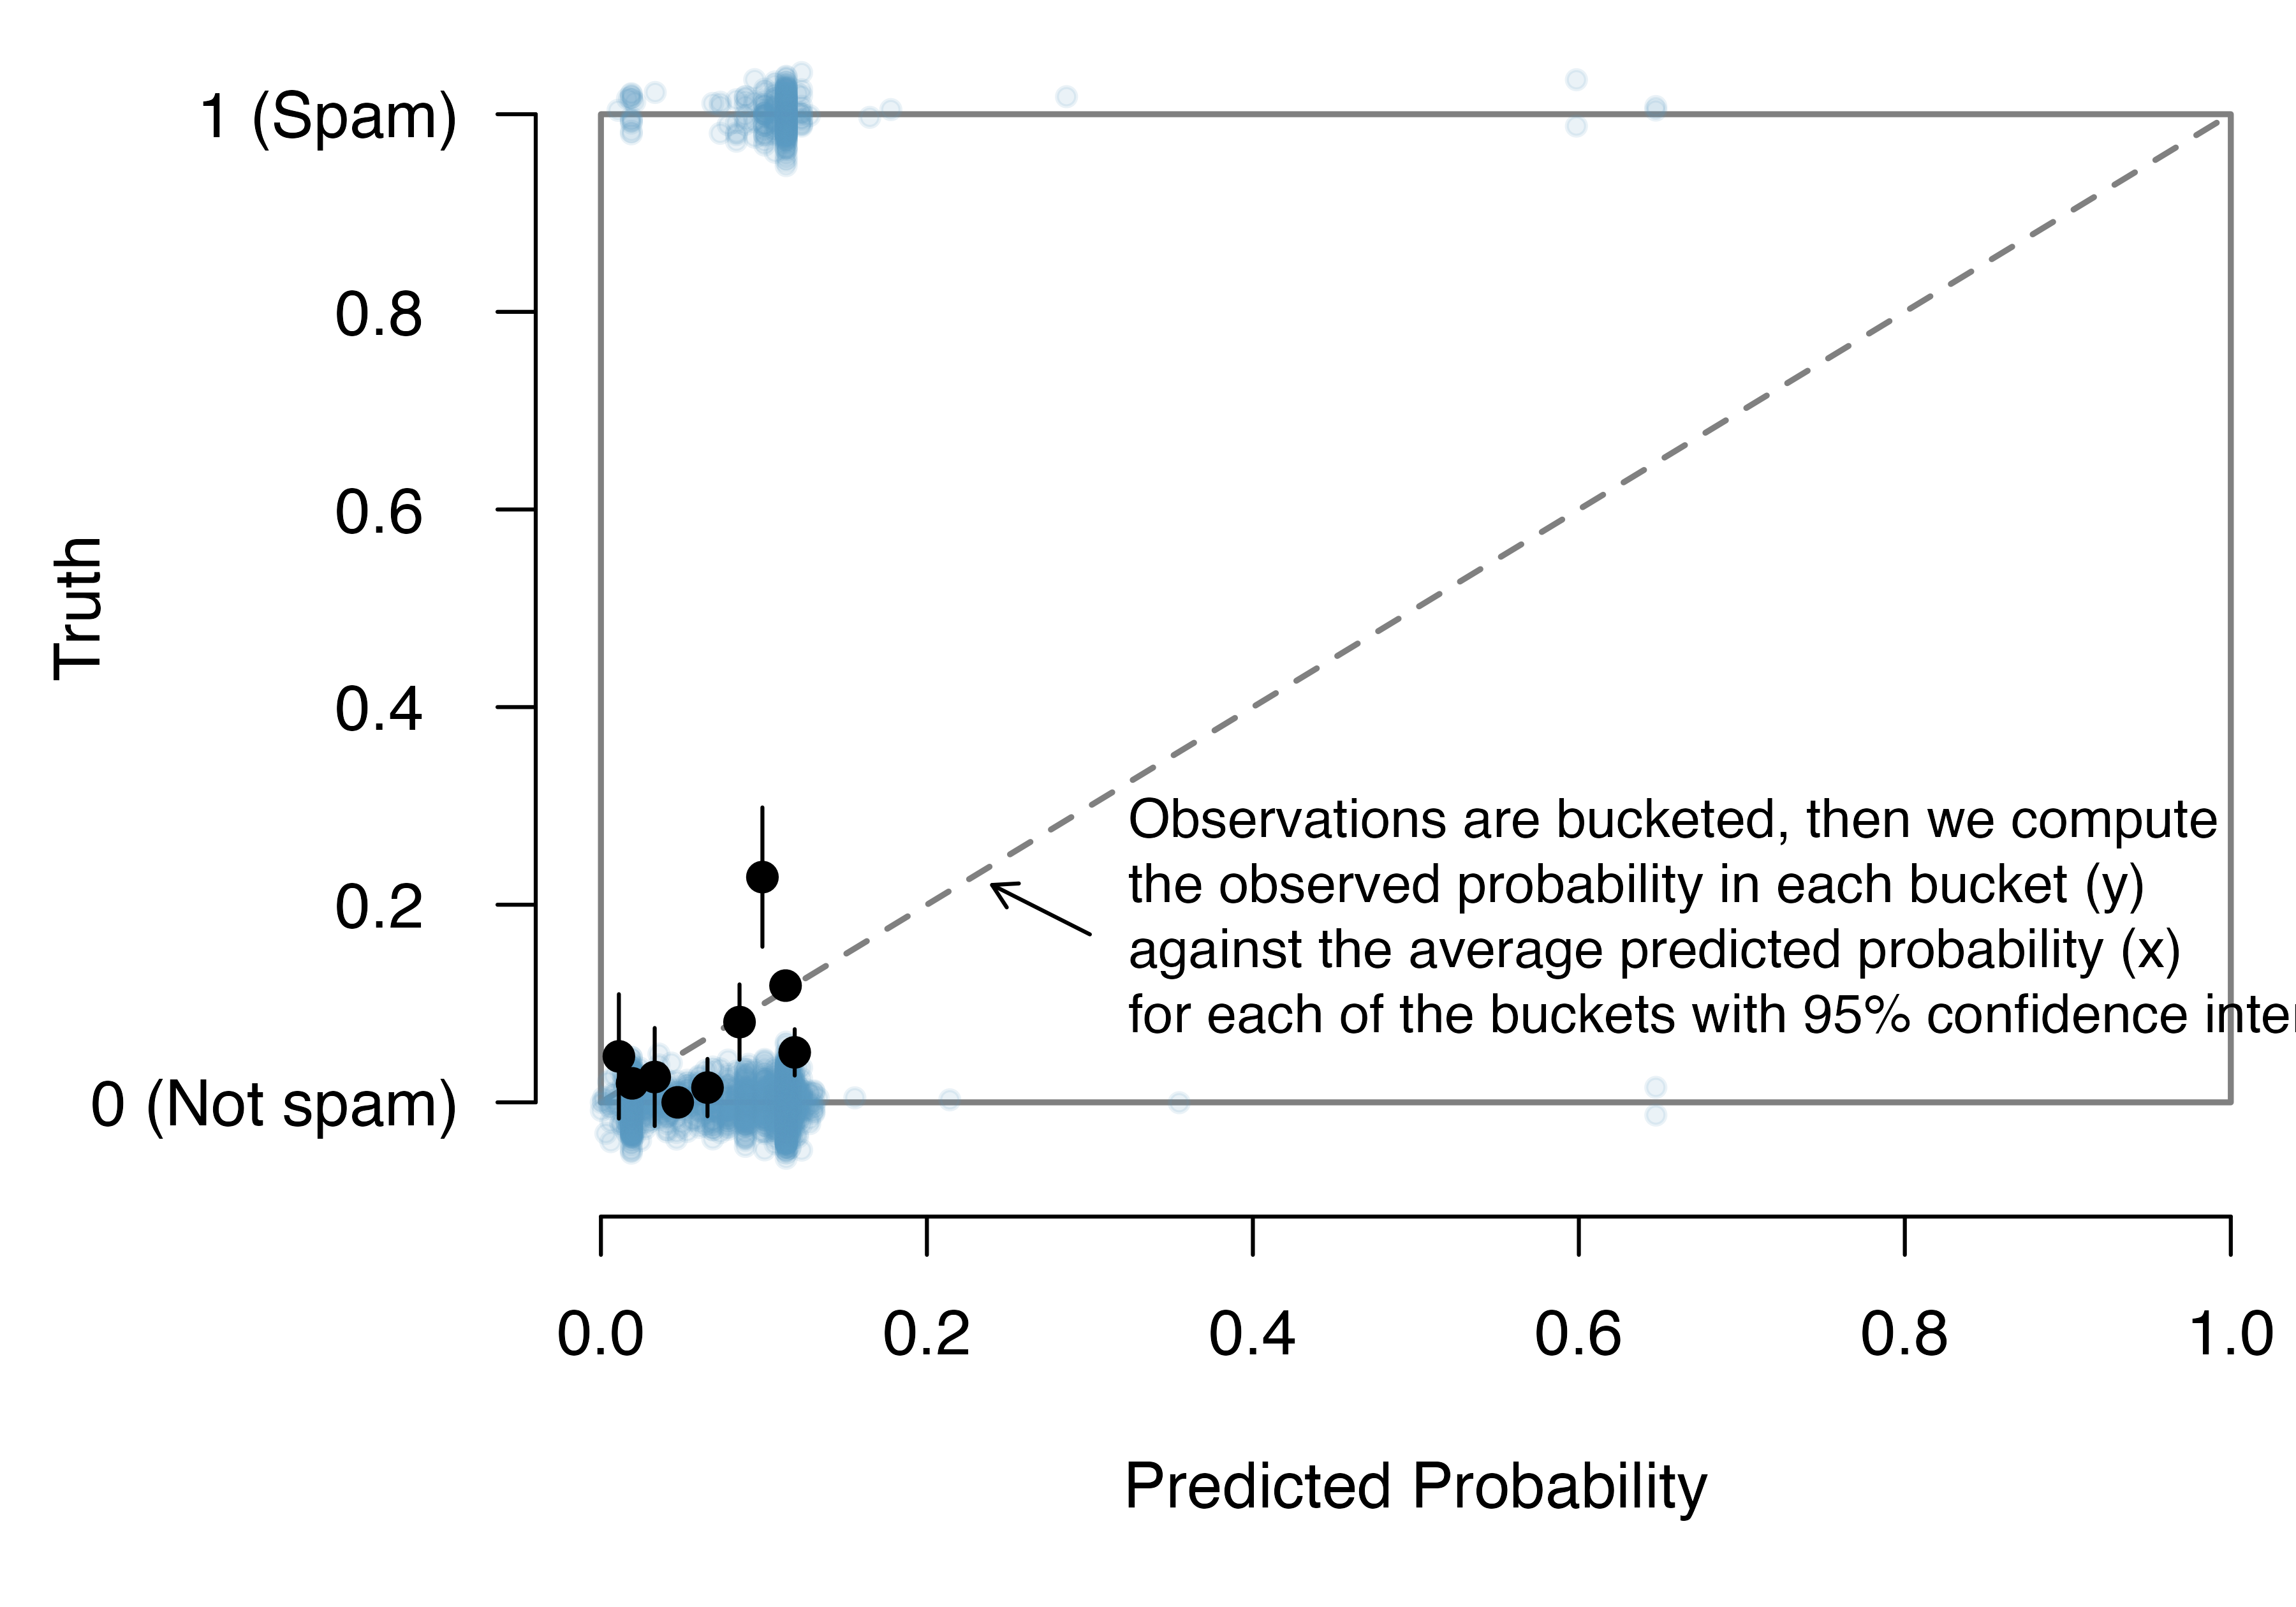 The dashed line is within the confidence bound of the 95% confidence intervals of each of the buckets, suggesting the logistic fit is reasonable.